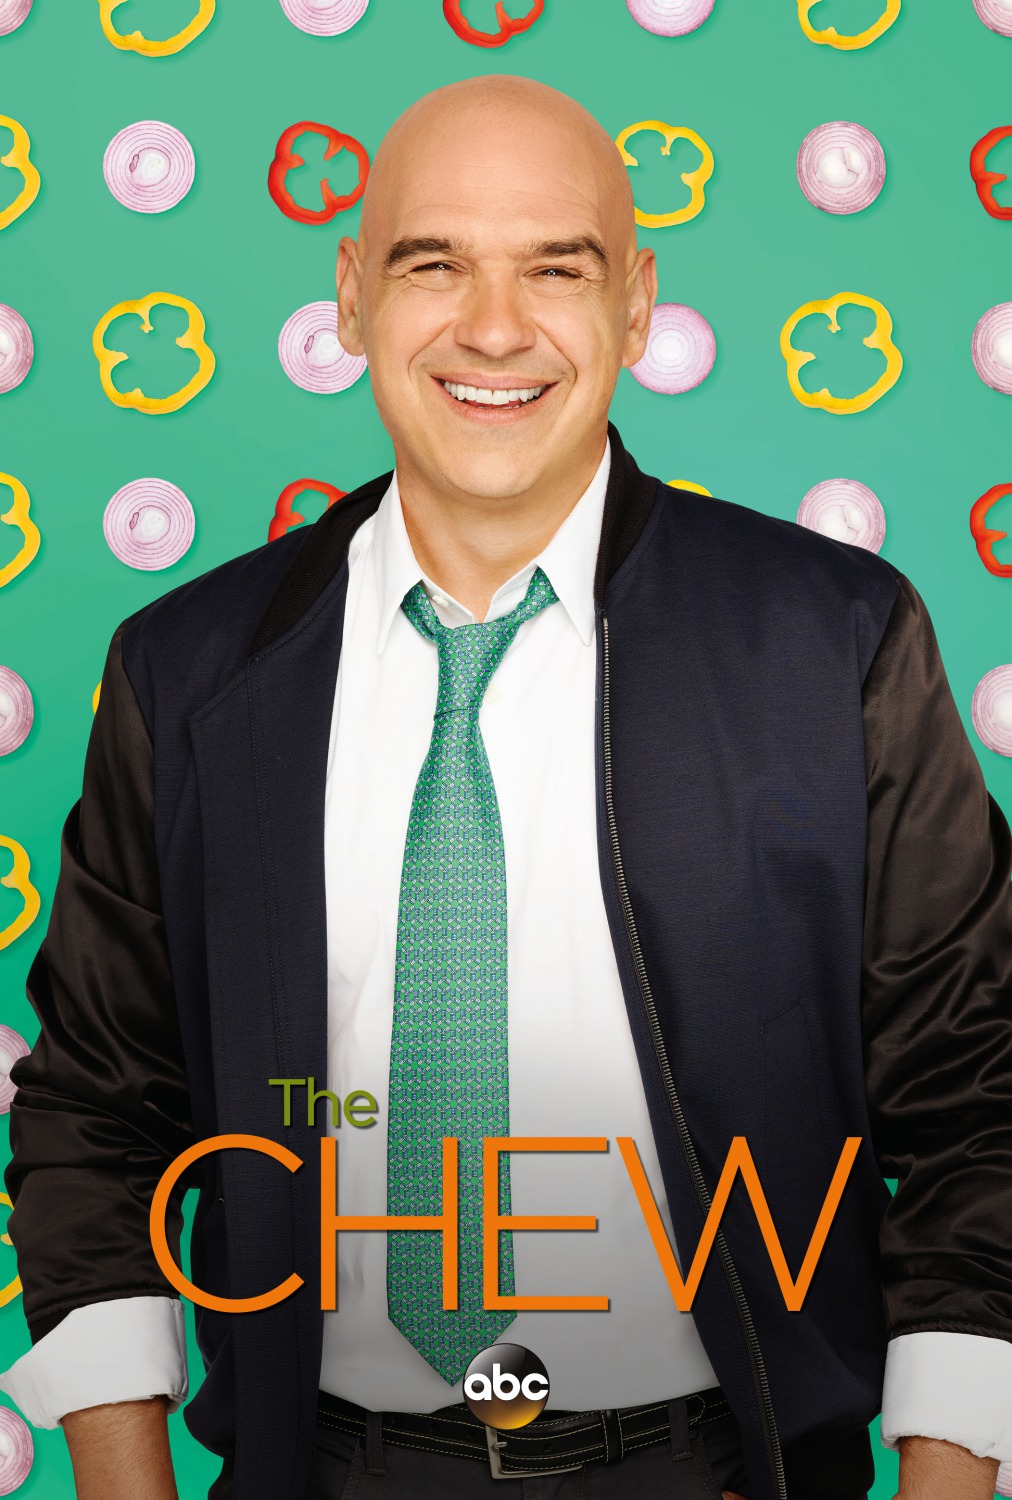 Extra Large TV Poster Image for The Chew (#11 of 11)